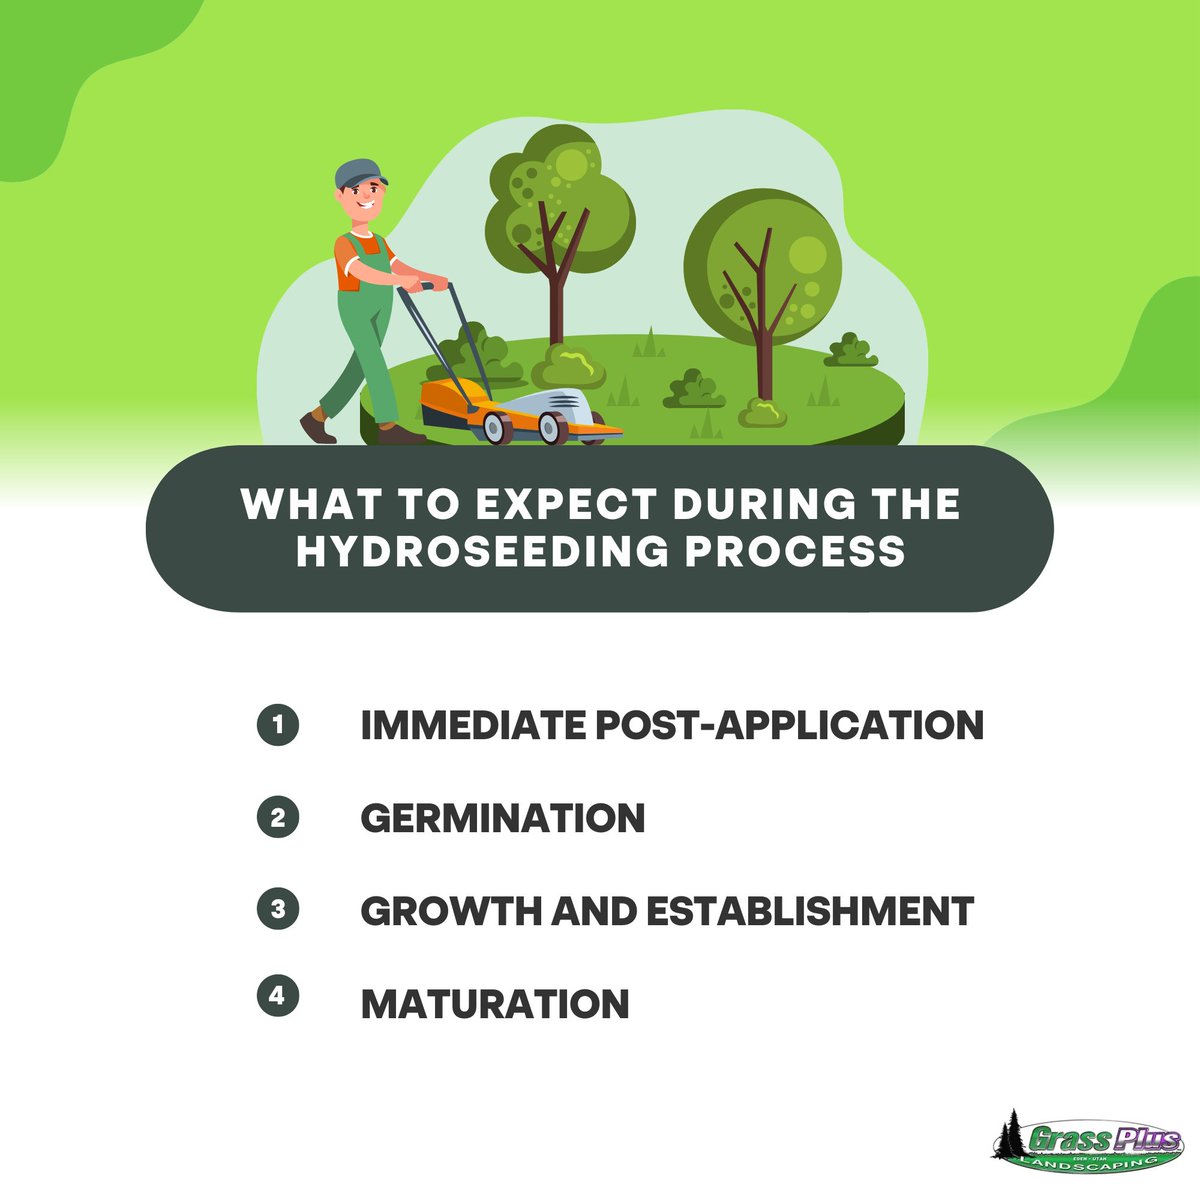 Achieve lush, green grass in no time with hydroseeding. Our latest blog post covers hydroseeding growth time, from benefits to process. 🌱🌿 

zurl.co/UJxC 

#hydroseeding #landscaping #lawnmaintenance #greengrass #outdoorliving #yardmakeover #landscapingcompany